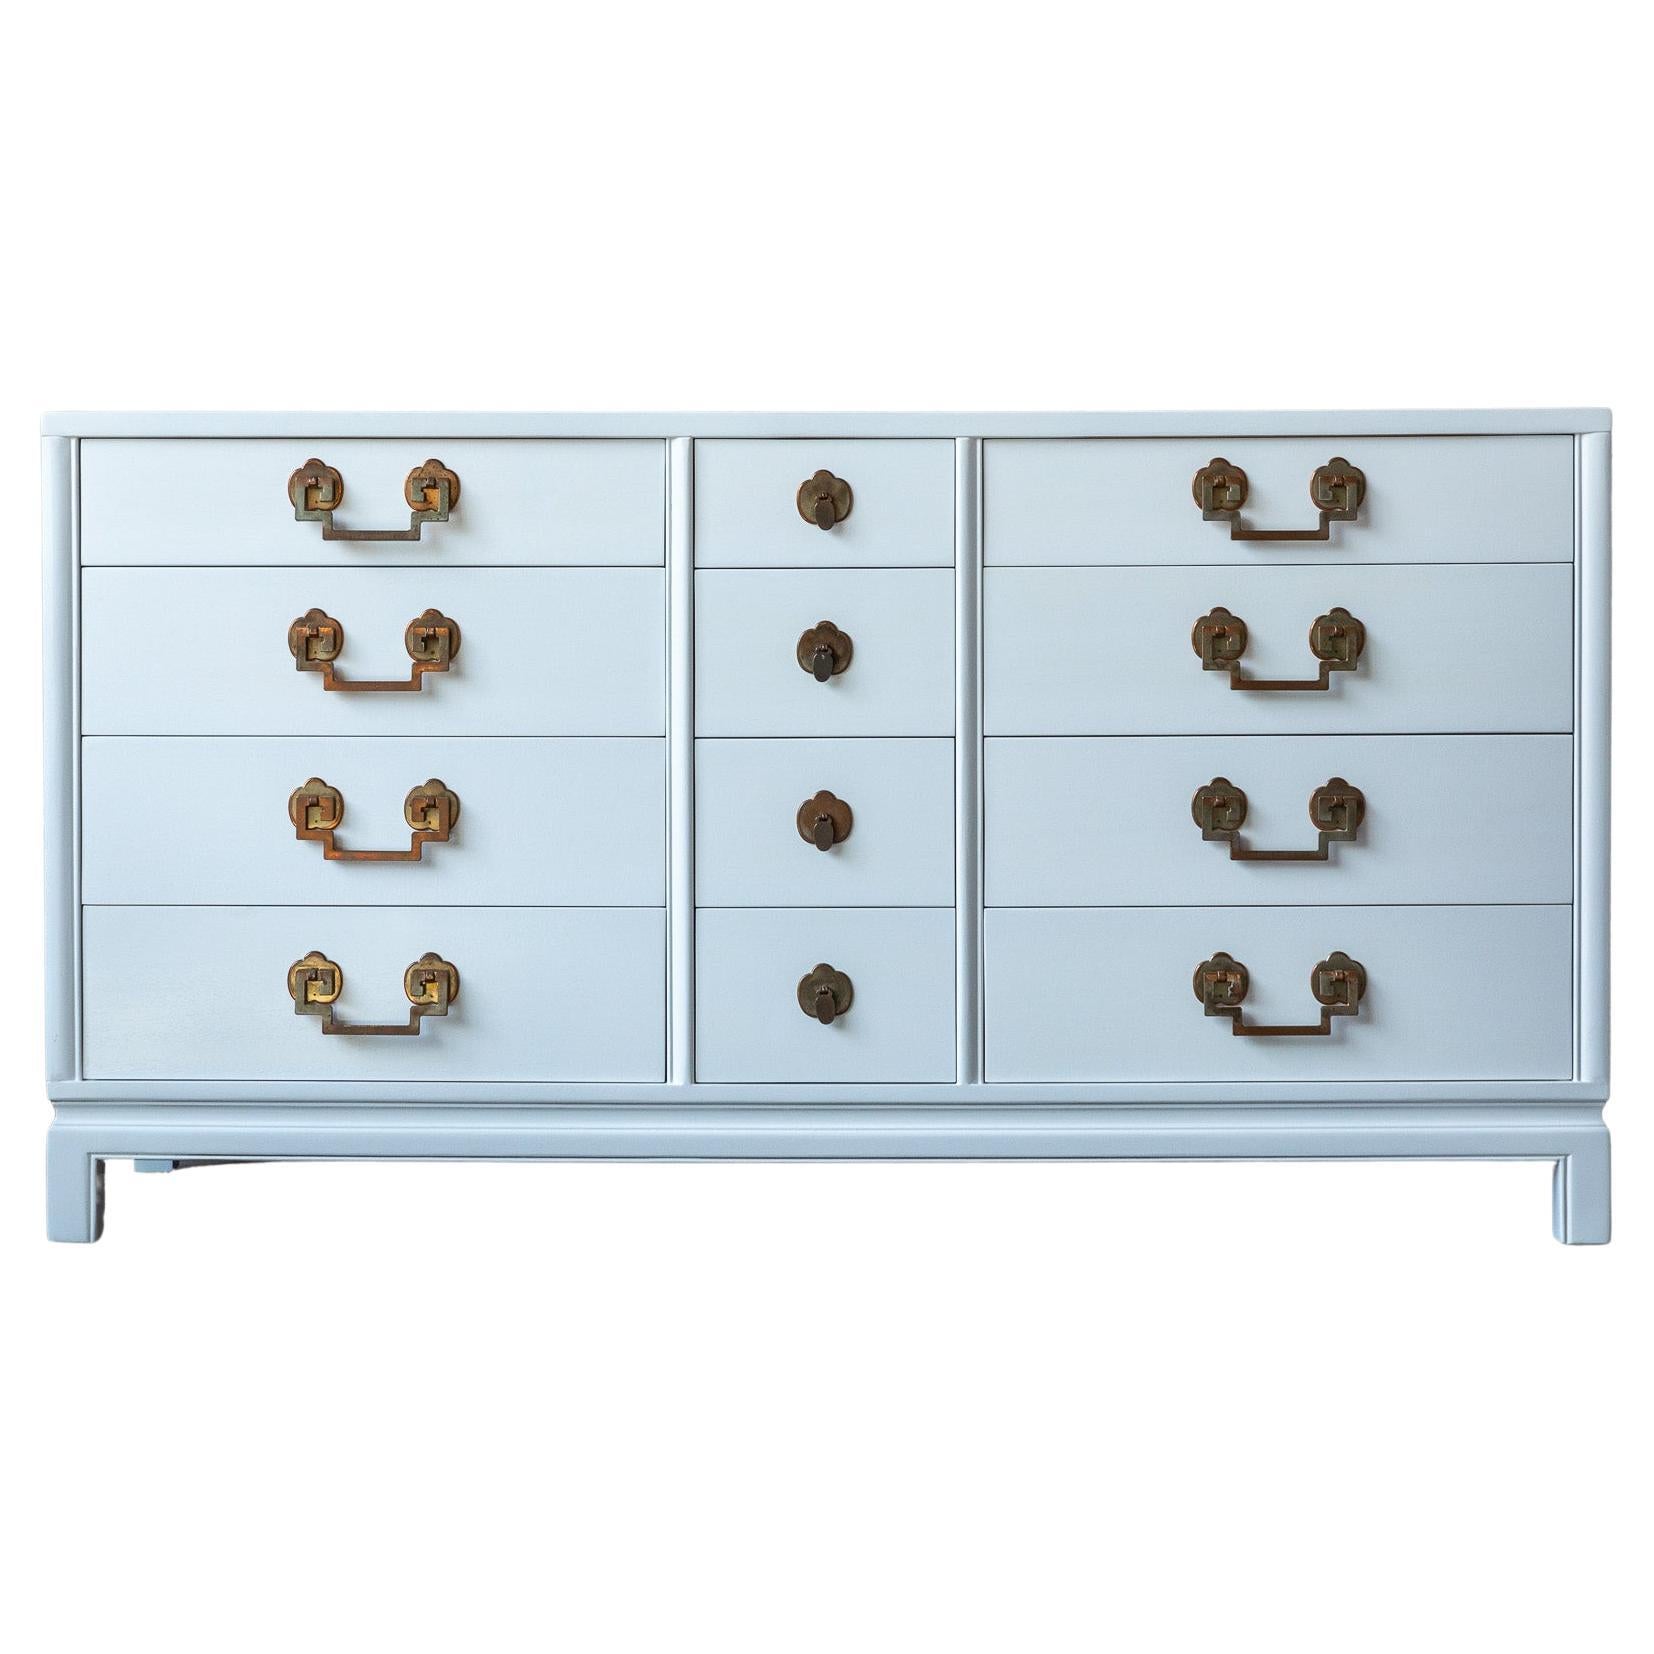 Midcentury Off-White Lacquered Landstrom 12 Drawer Dresser with Copper Pulls